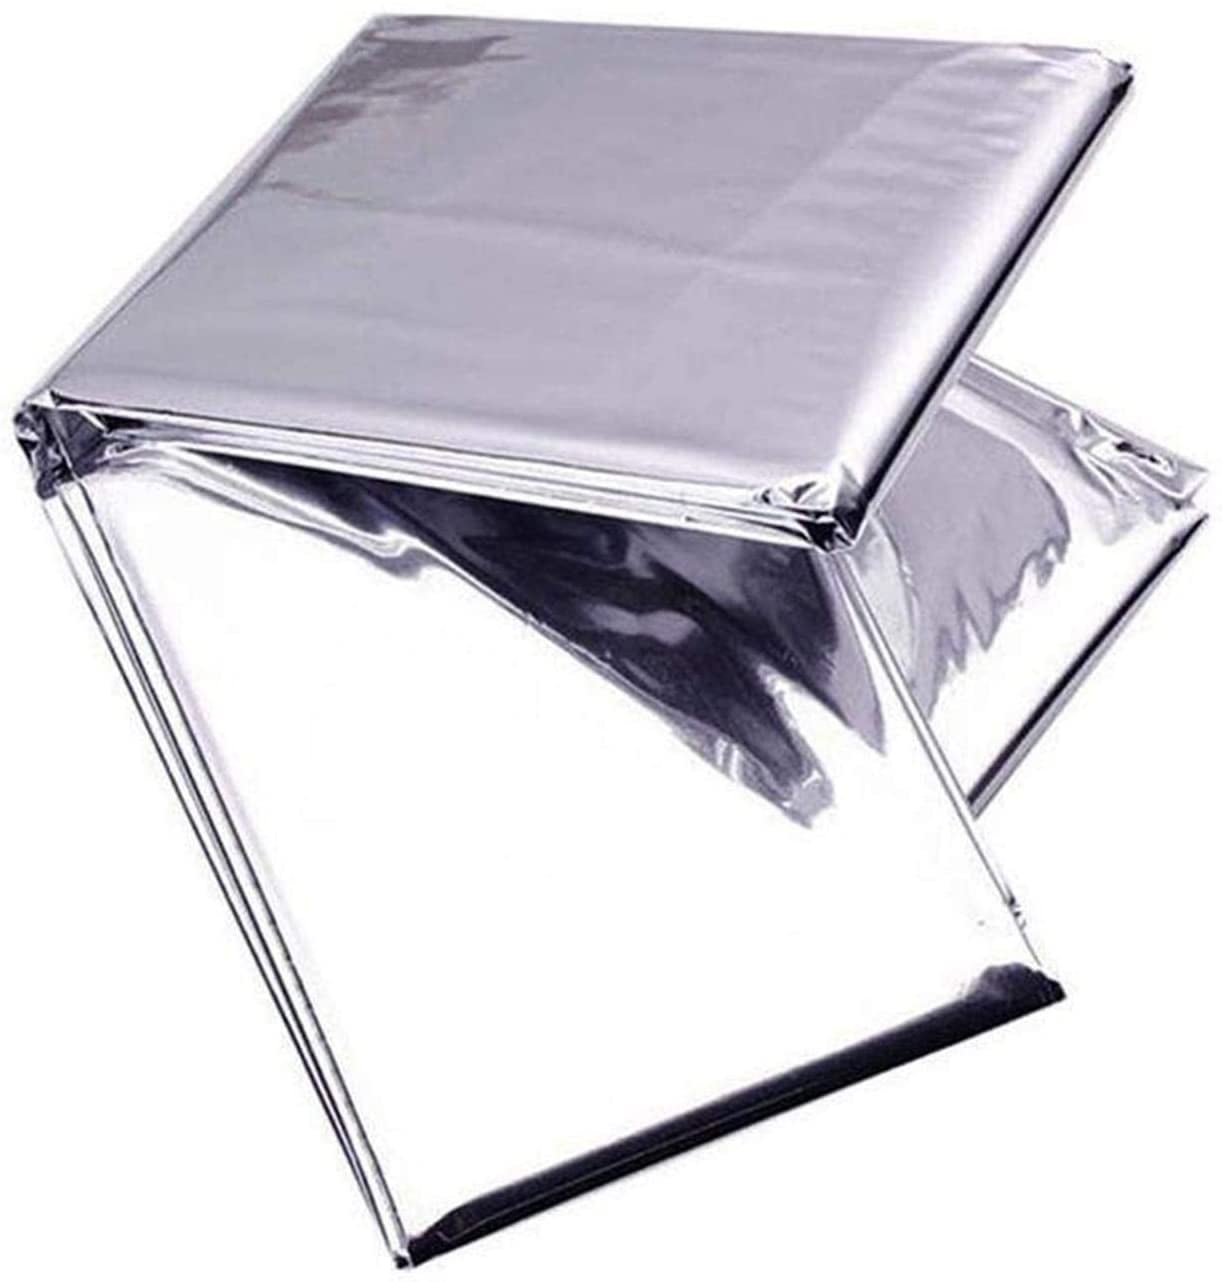 Garden Greenhouse Covering Foil Sheets 6 Pack High Silver Reflective Mylar Film 